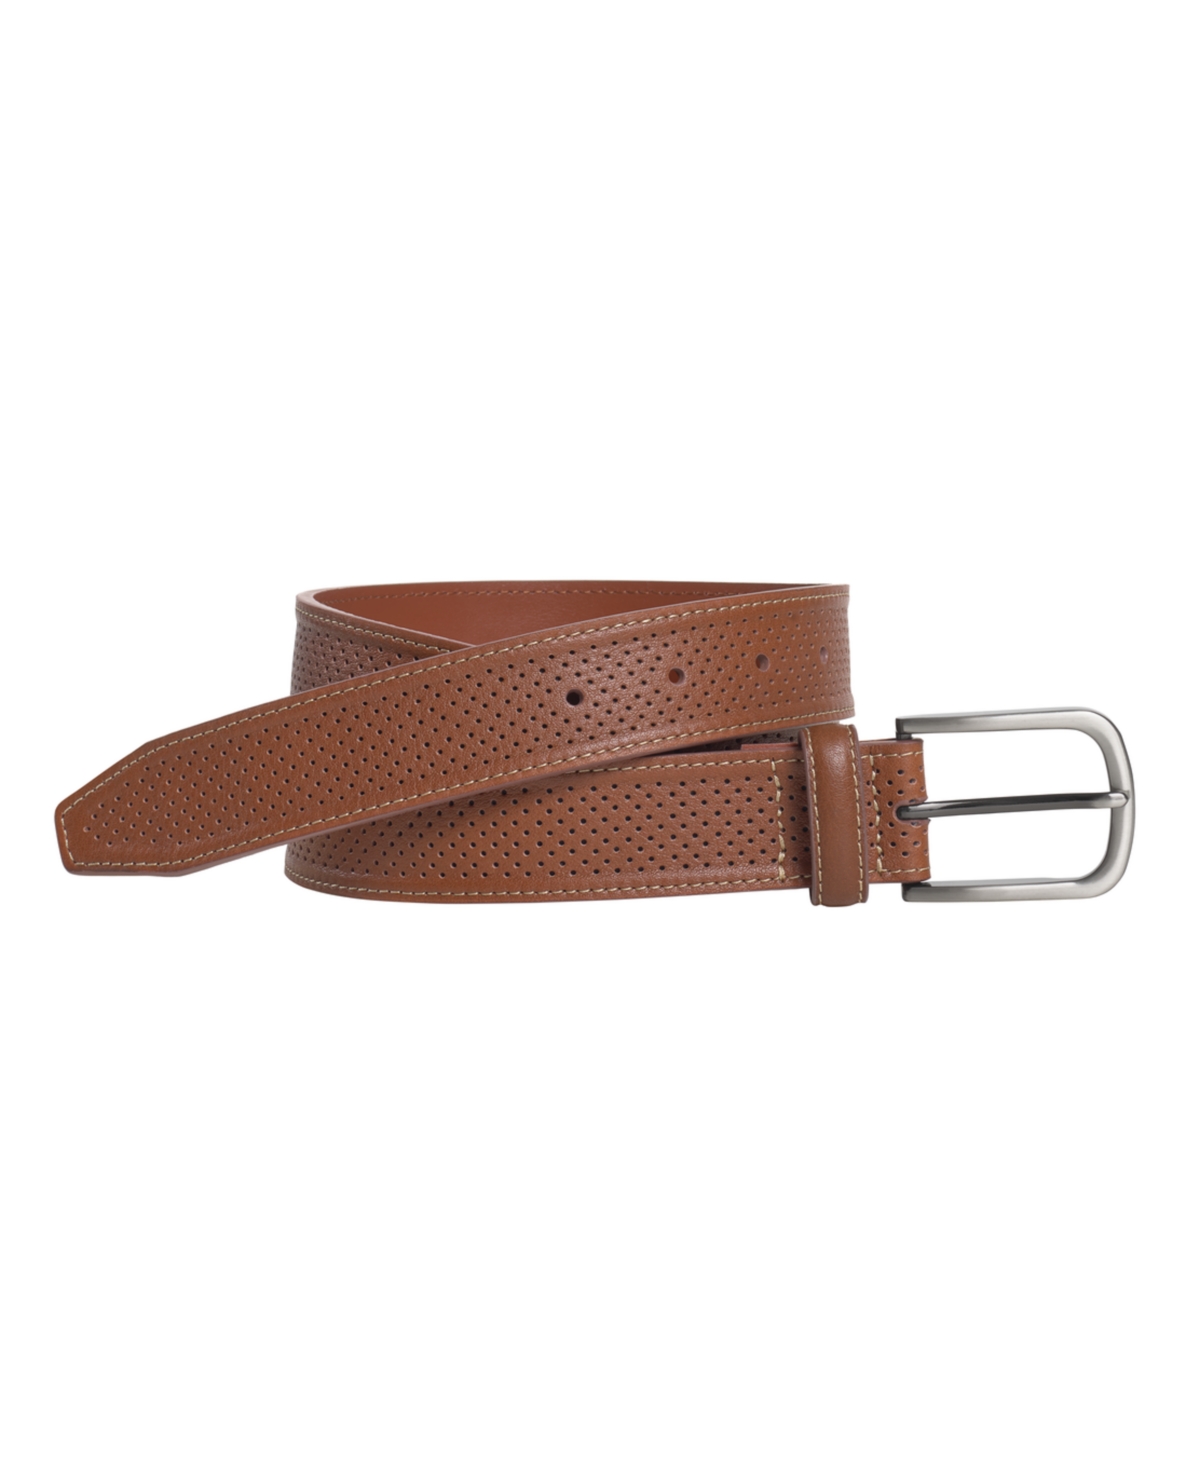 Men's Soft Perforated Leather Belt - Tan, Bicycle